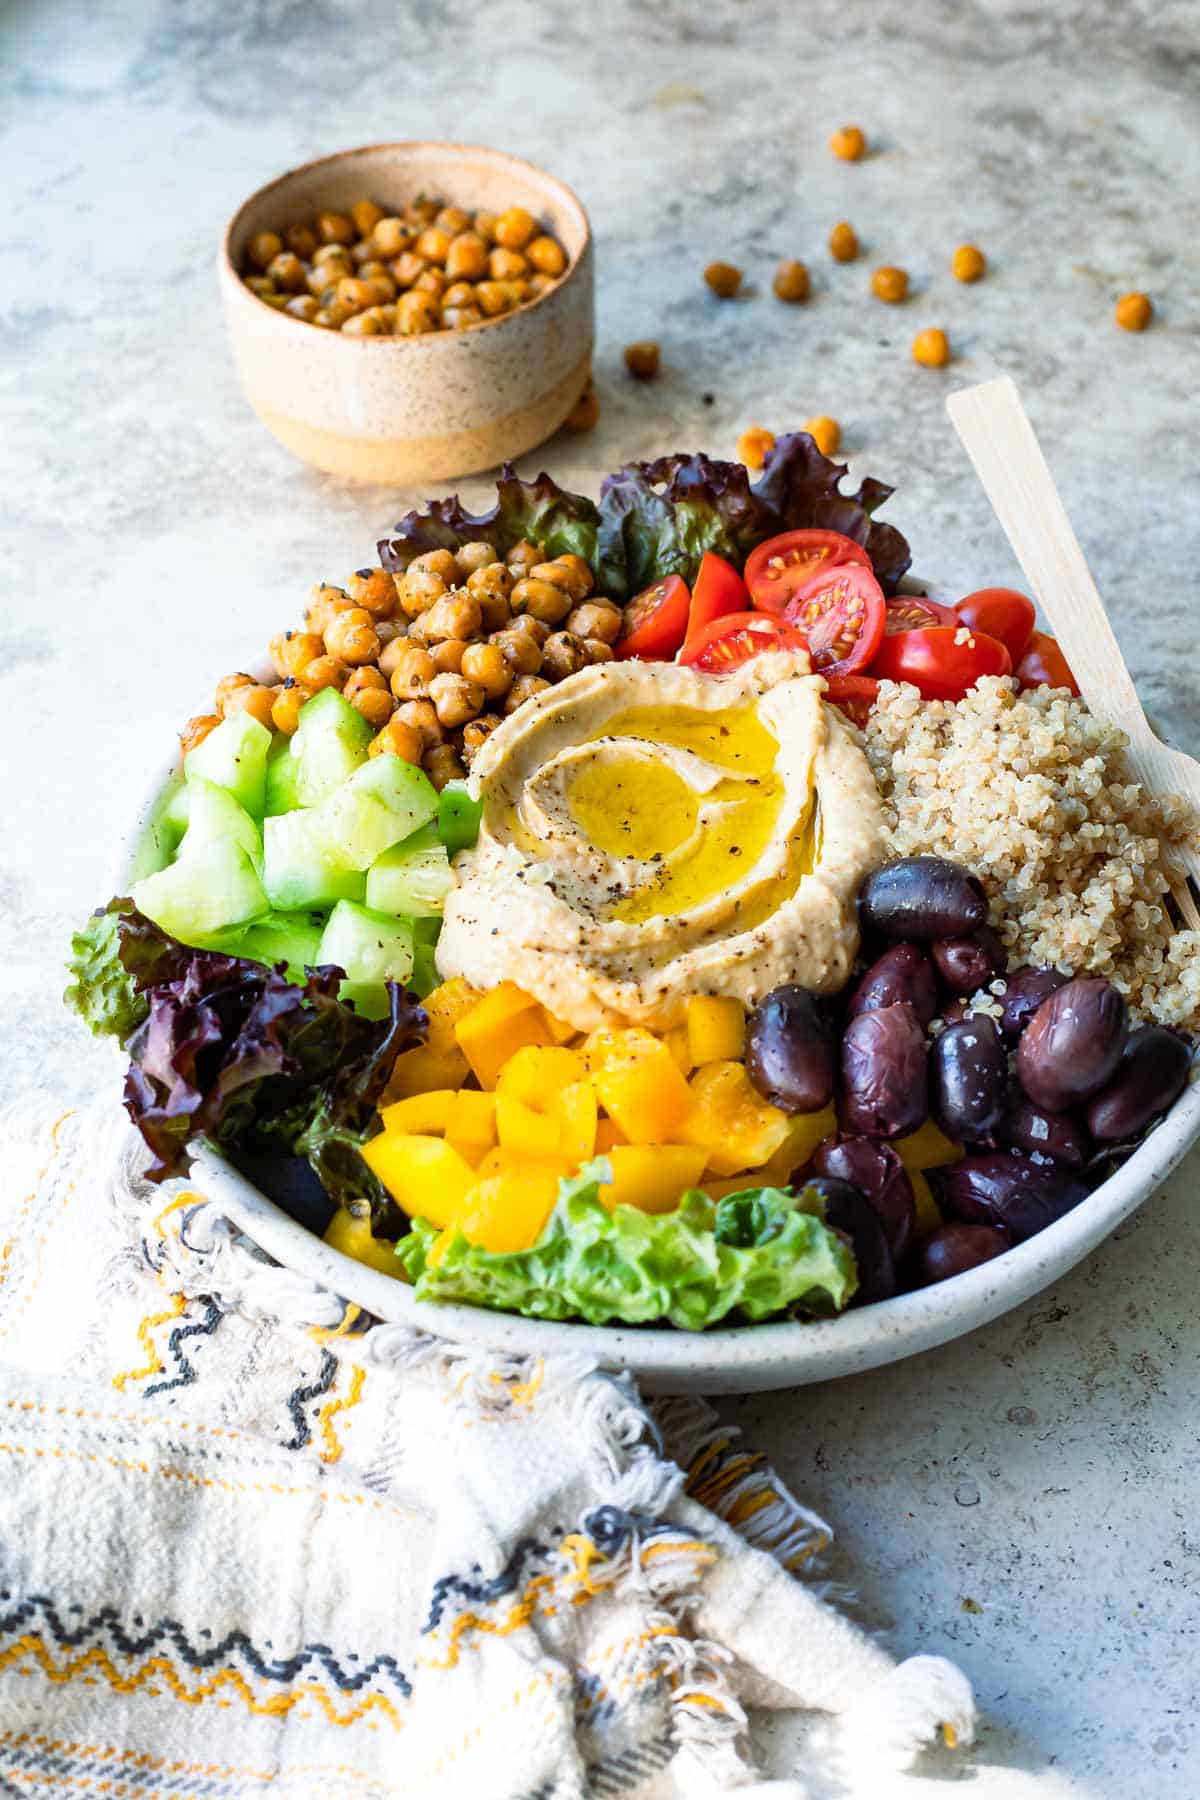 A Mediterranean Buddha bowl next to a small bowl of roasted chickpeas.